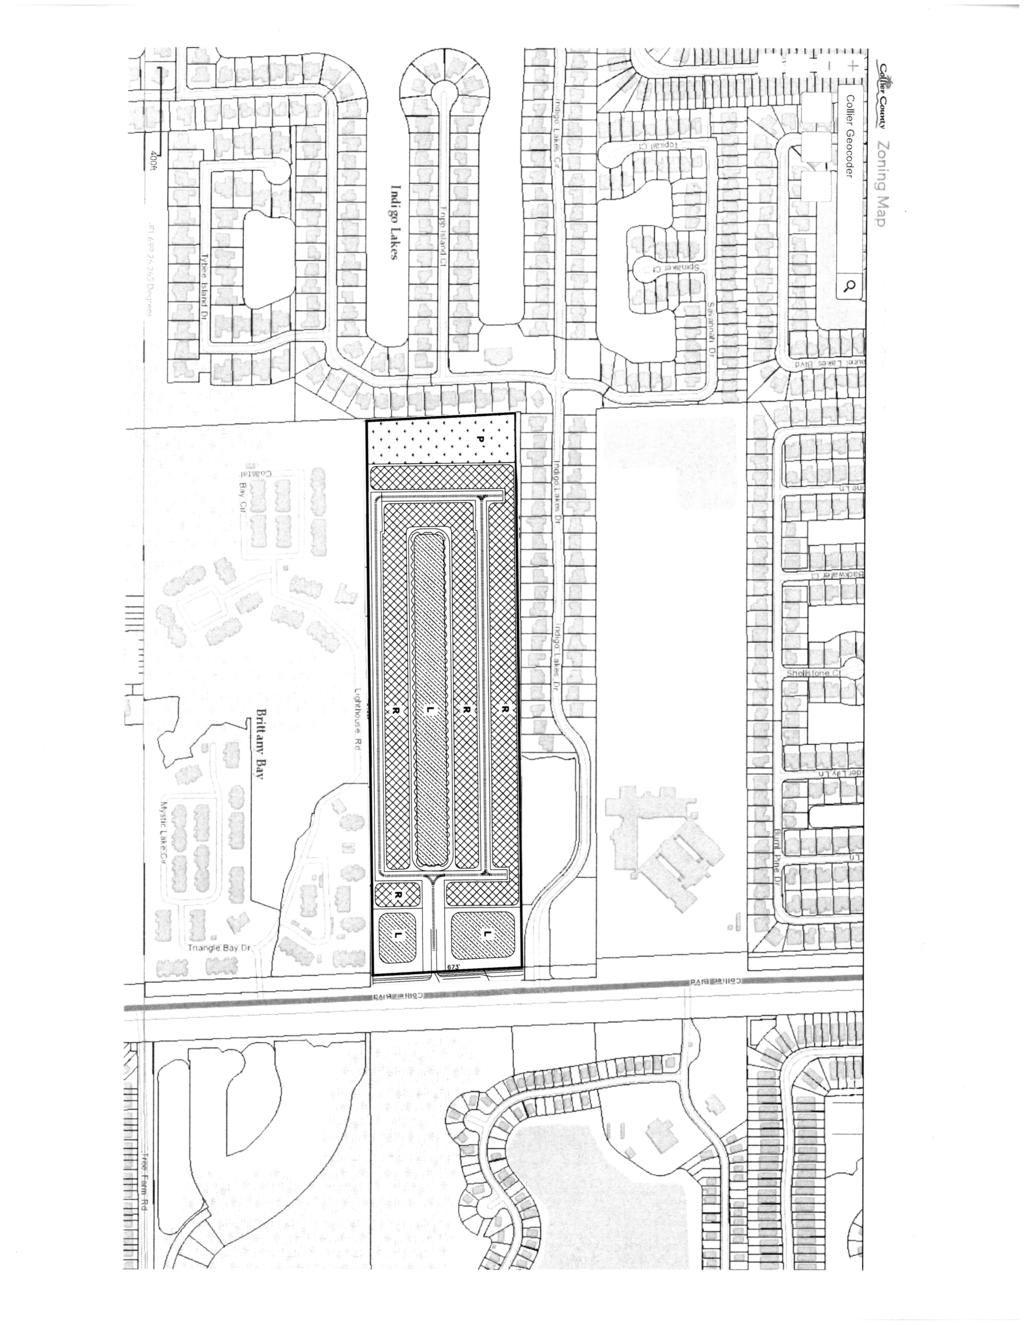 Page 7 of 9 preserve rec 2 story Multi-family lake 2 story Multi-family lake / 1" = 540 LF Preserve / Crystal Lakes RV Resort ARCHITECTS - PLANNERS - ENGINEERS Naples, Florida (239) 263-6934 7-27-17